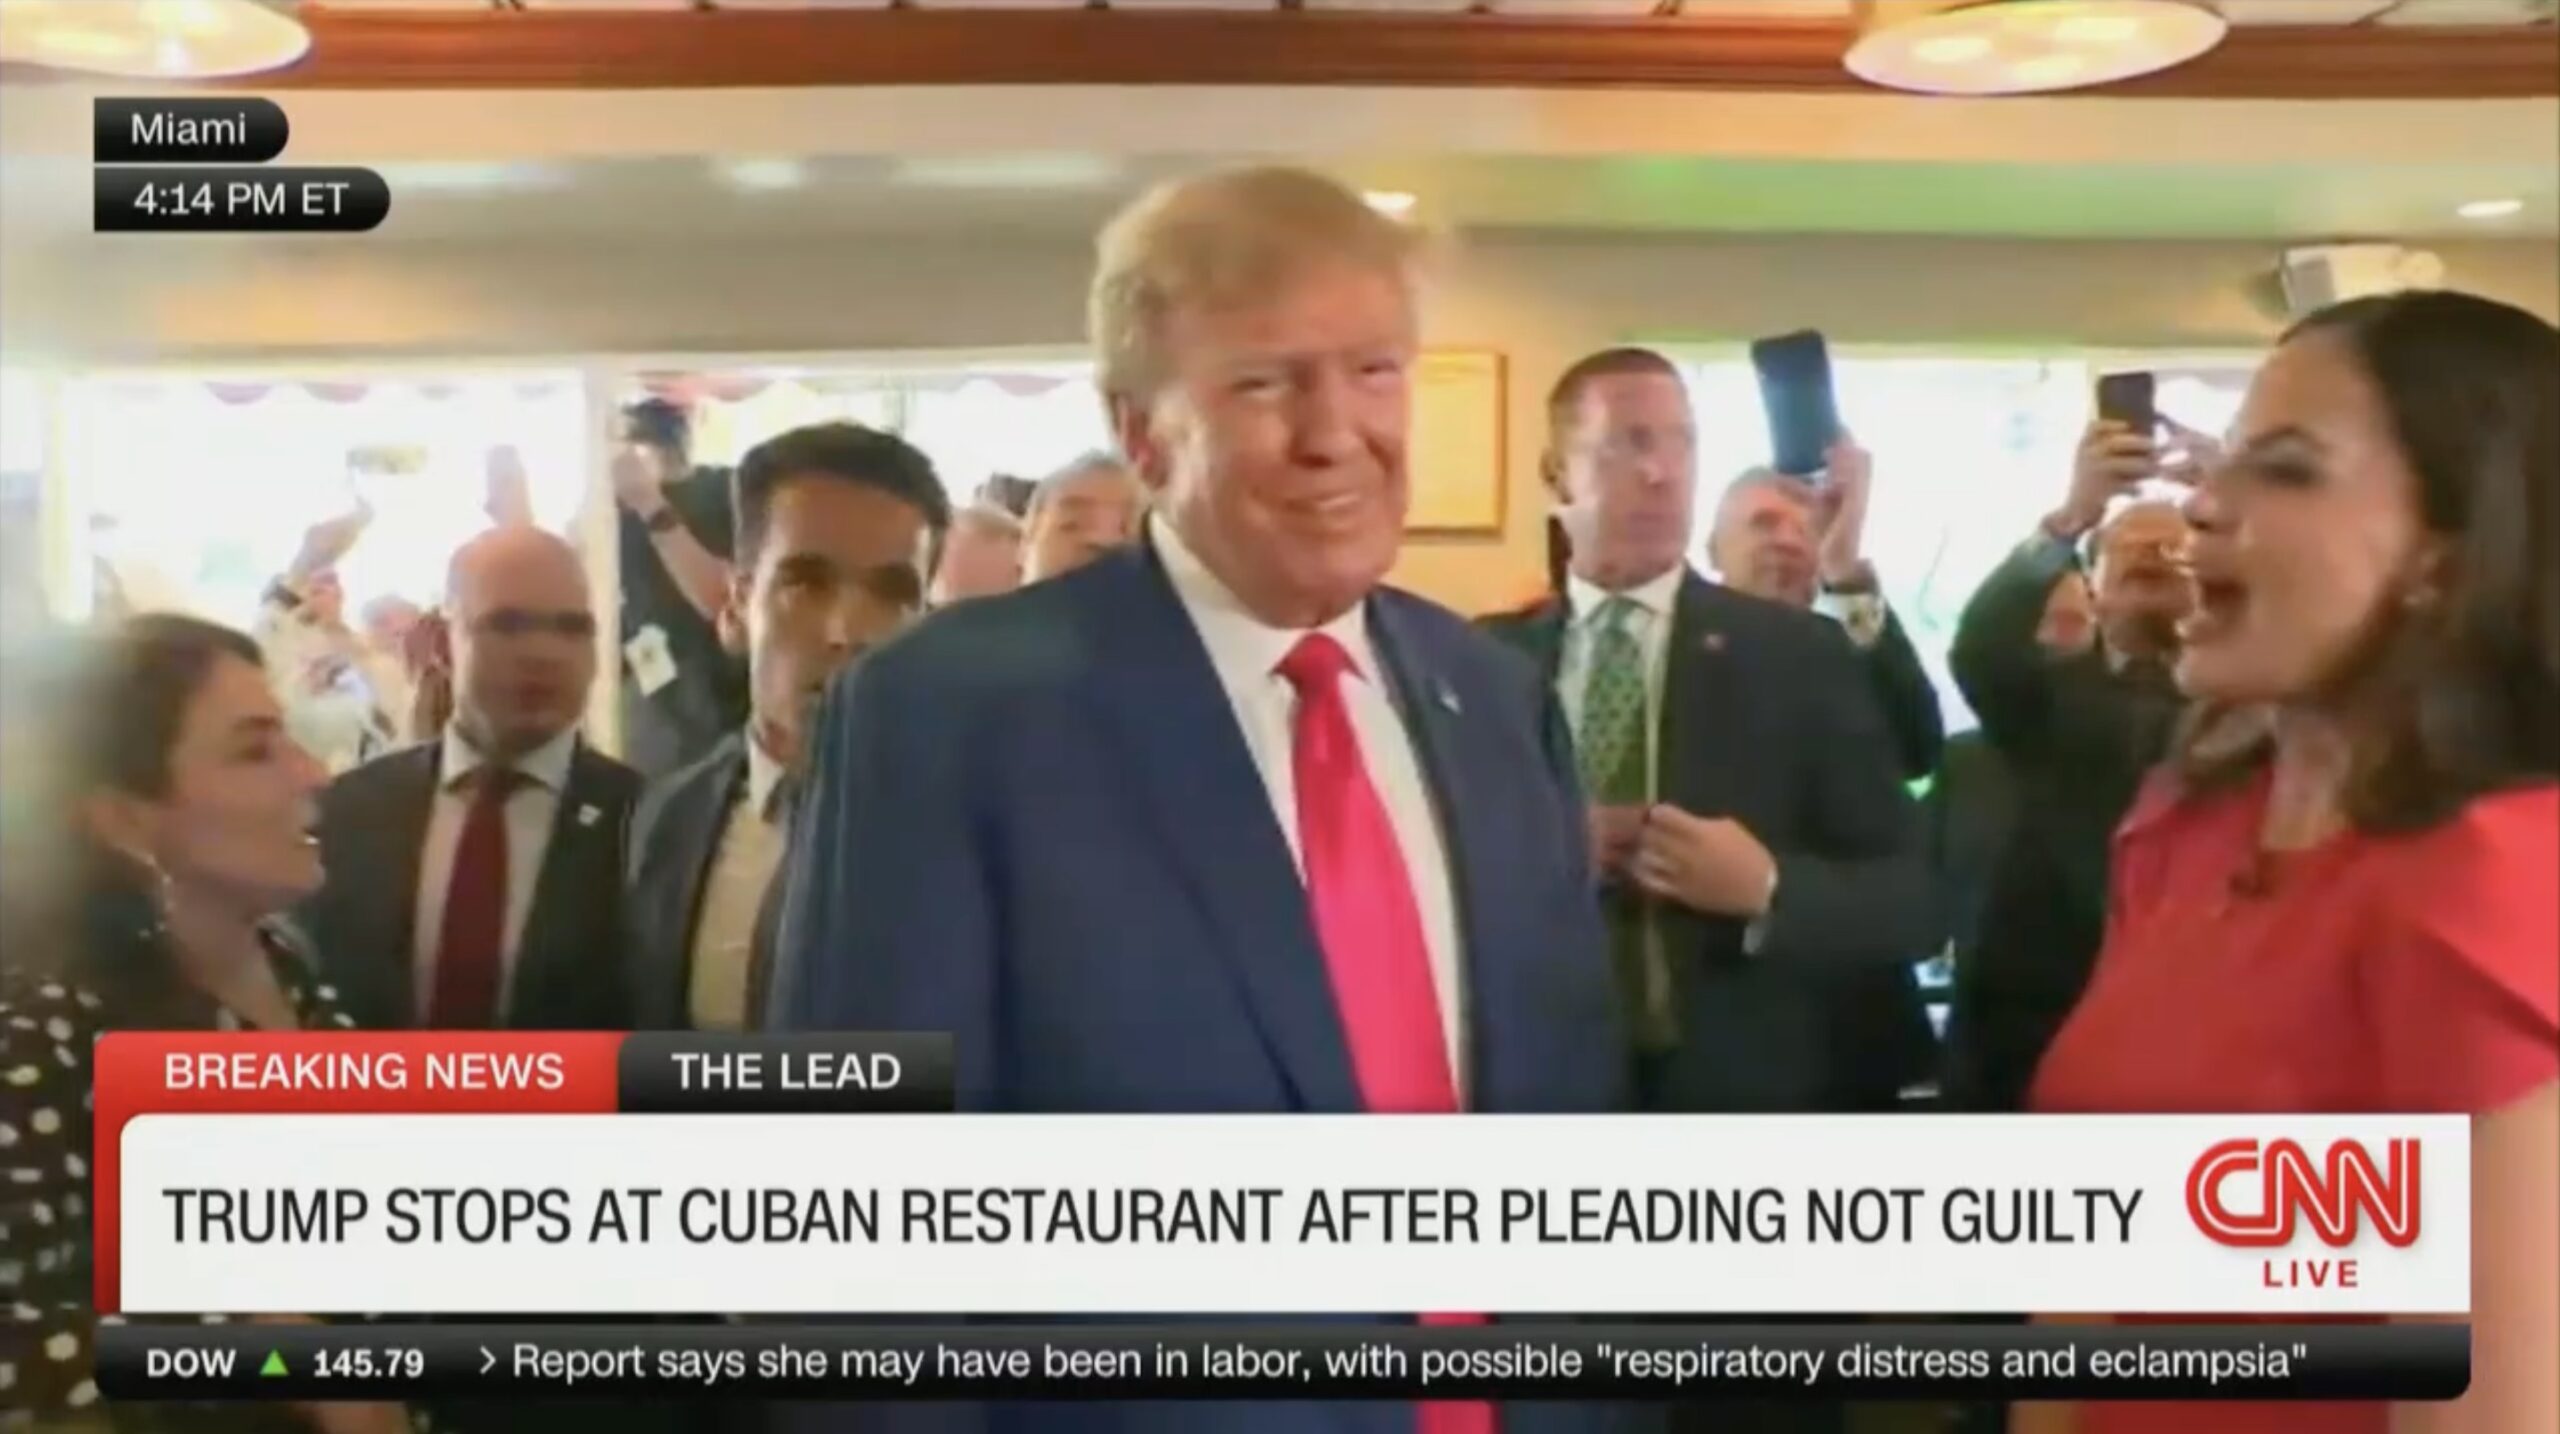 Trump Reportedly Left Restaurant Without Paying Any Bills After Telling His Supporters ‘Food For Everyone!’ (mediaite.com)